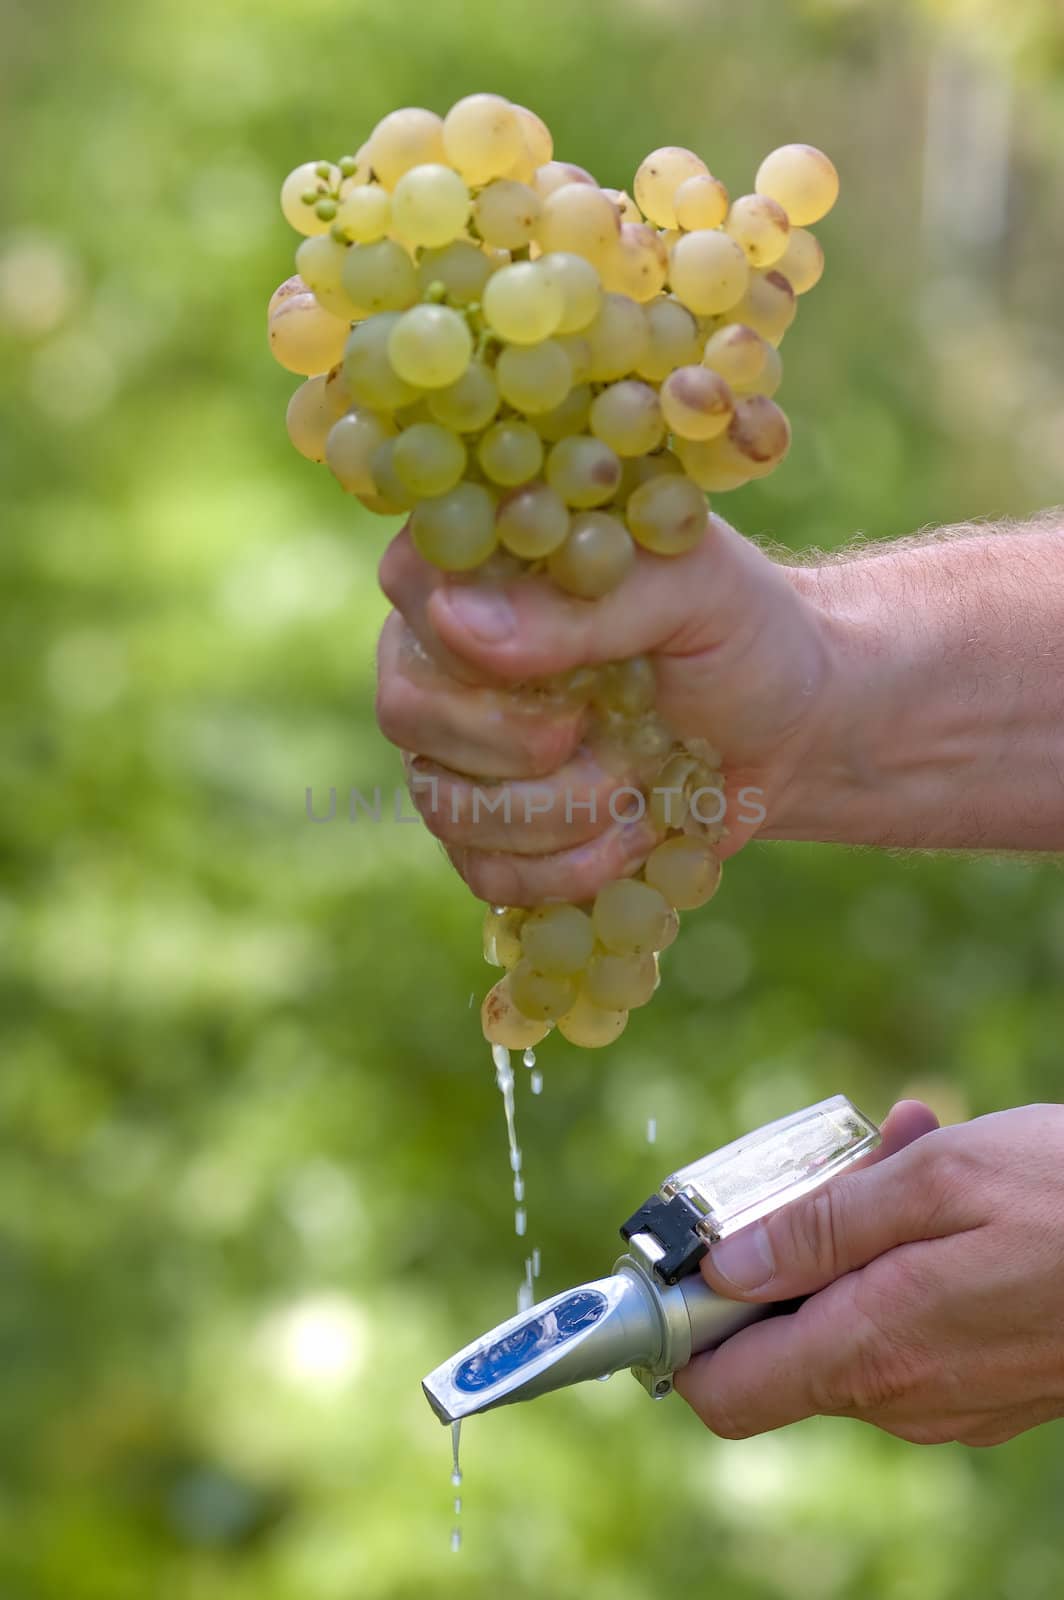 Checking The Sugar Contest Of Grape by Rainman